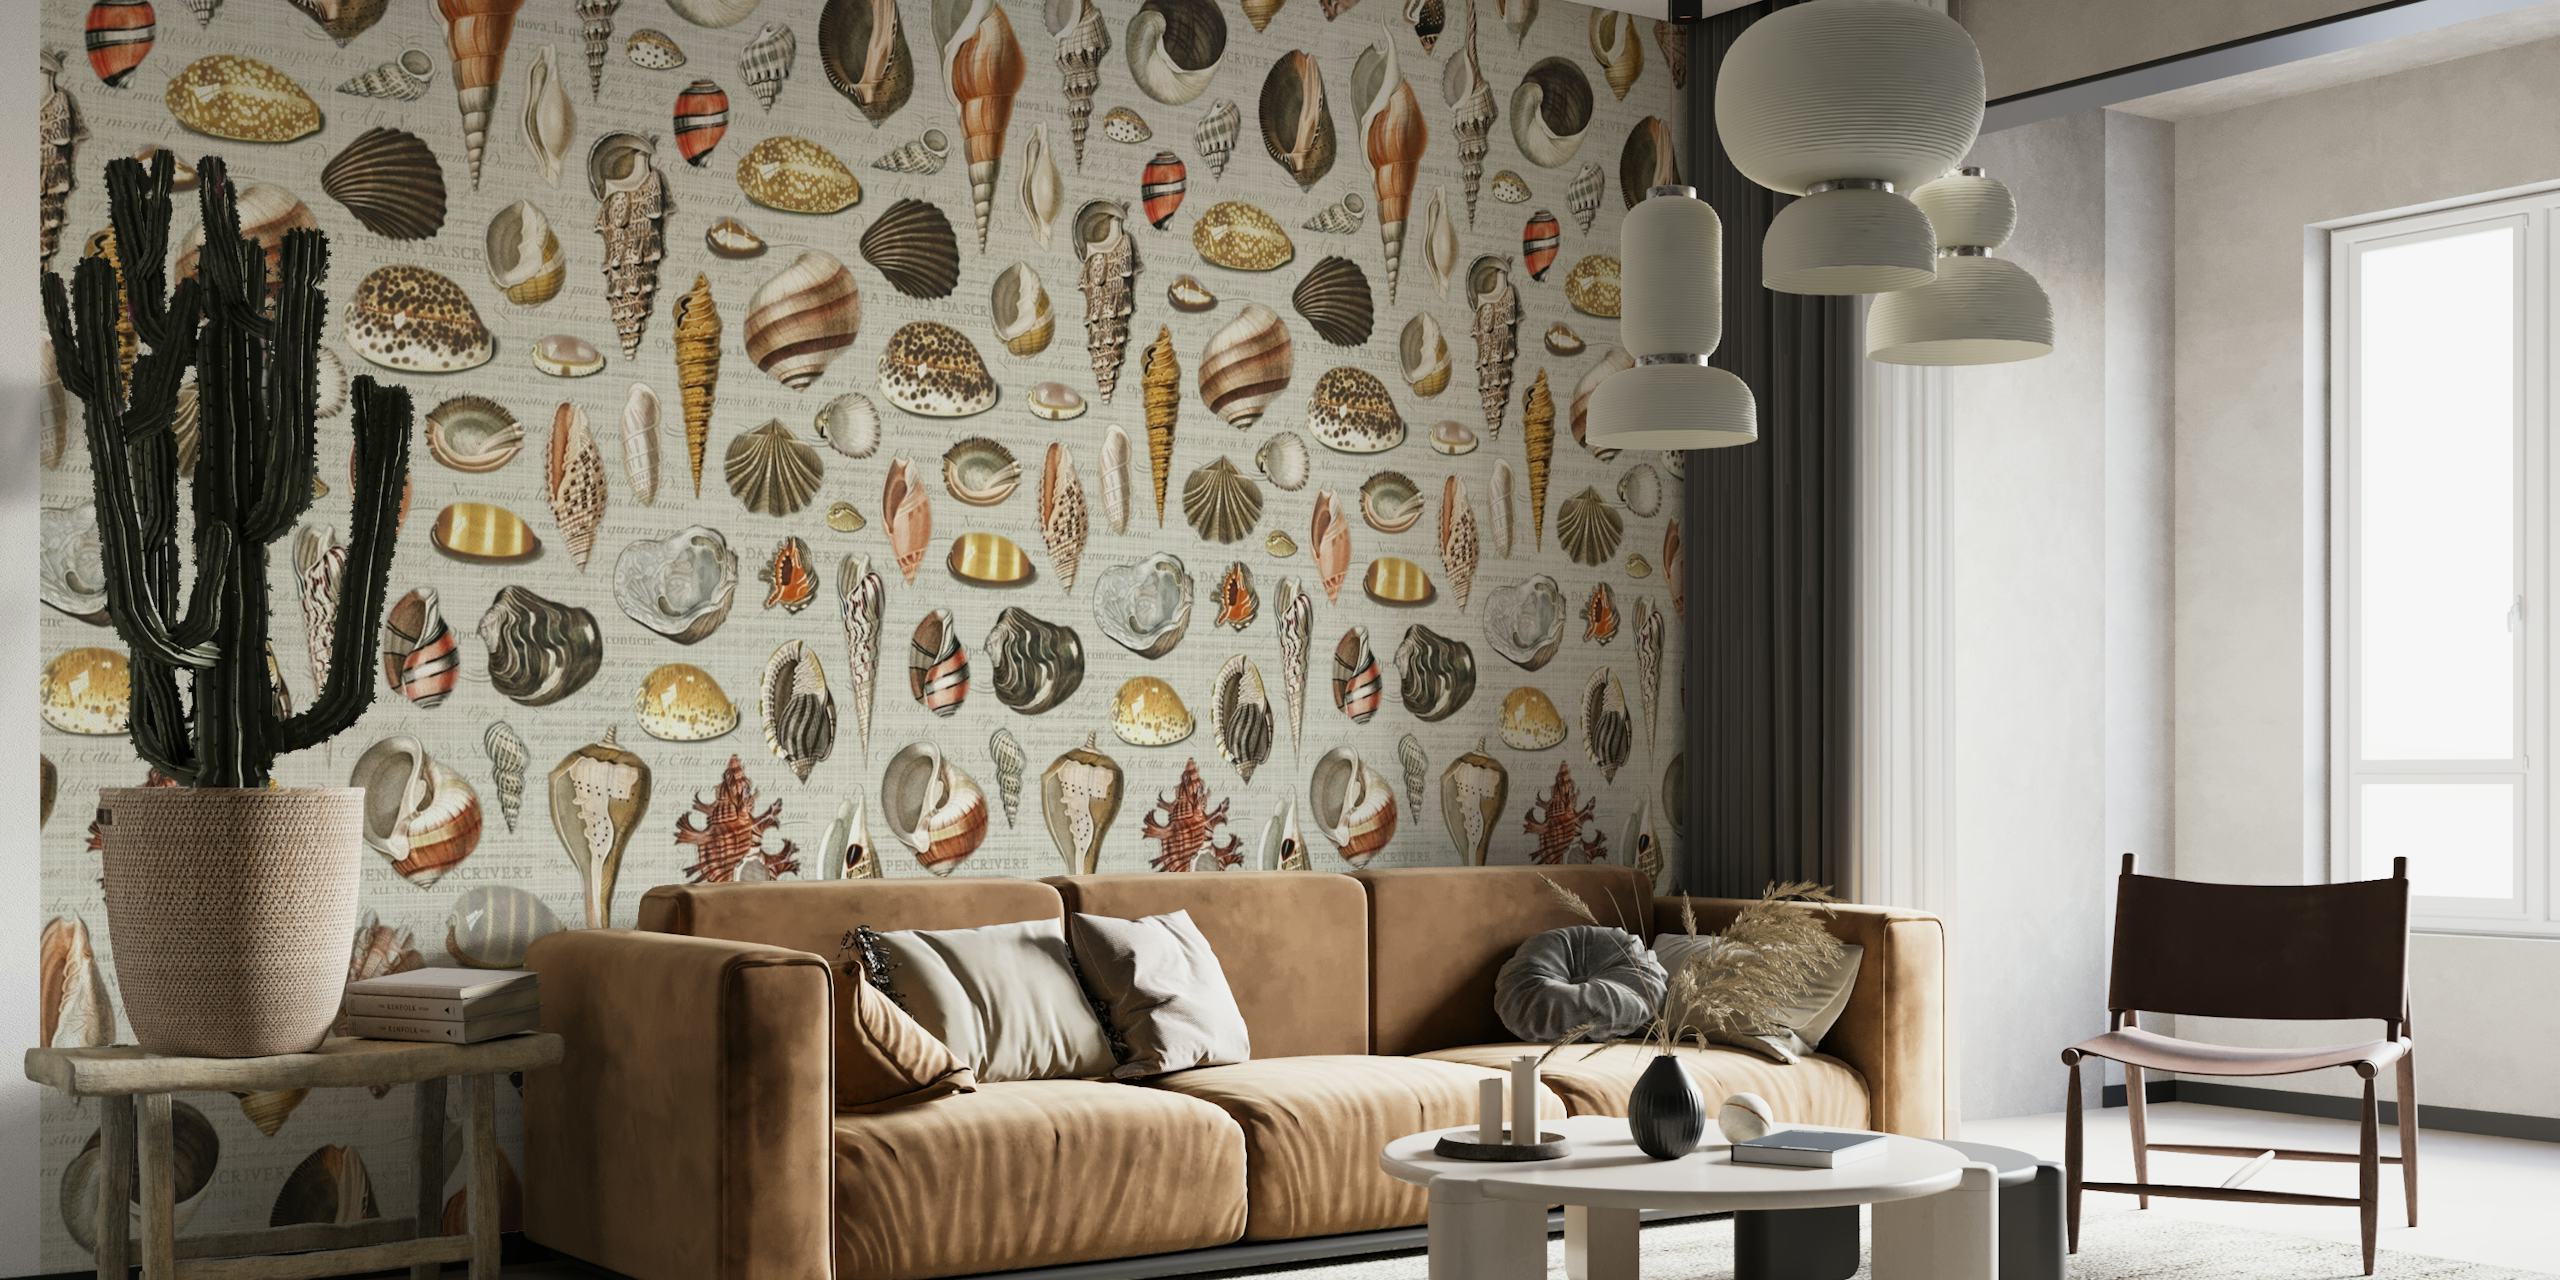 Nautilus-patterned wall mural with greige, yellow, and copper tones